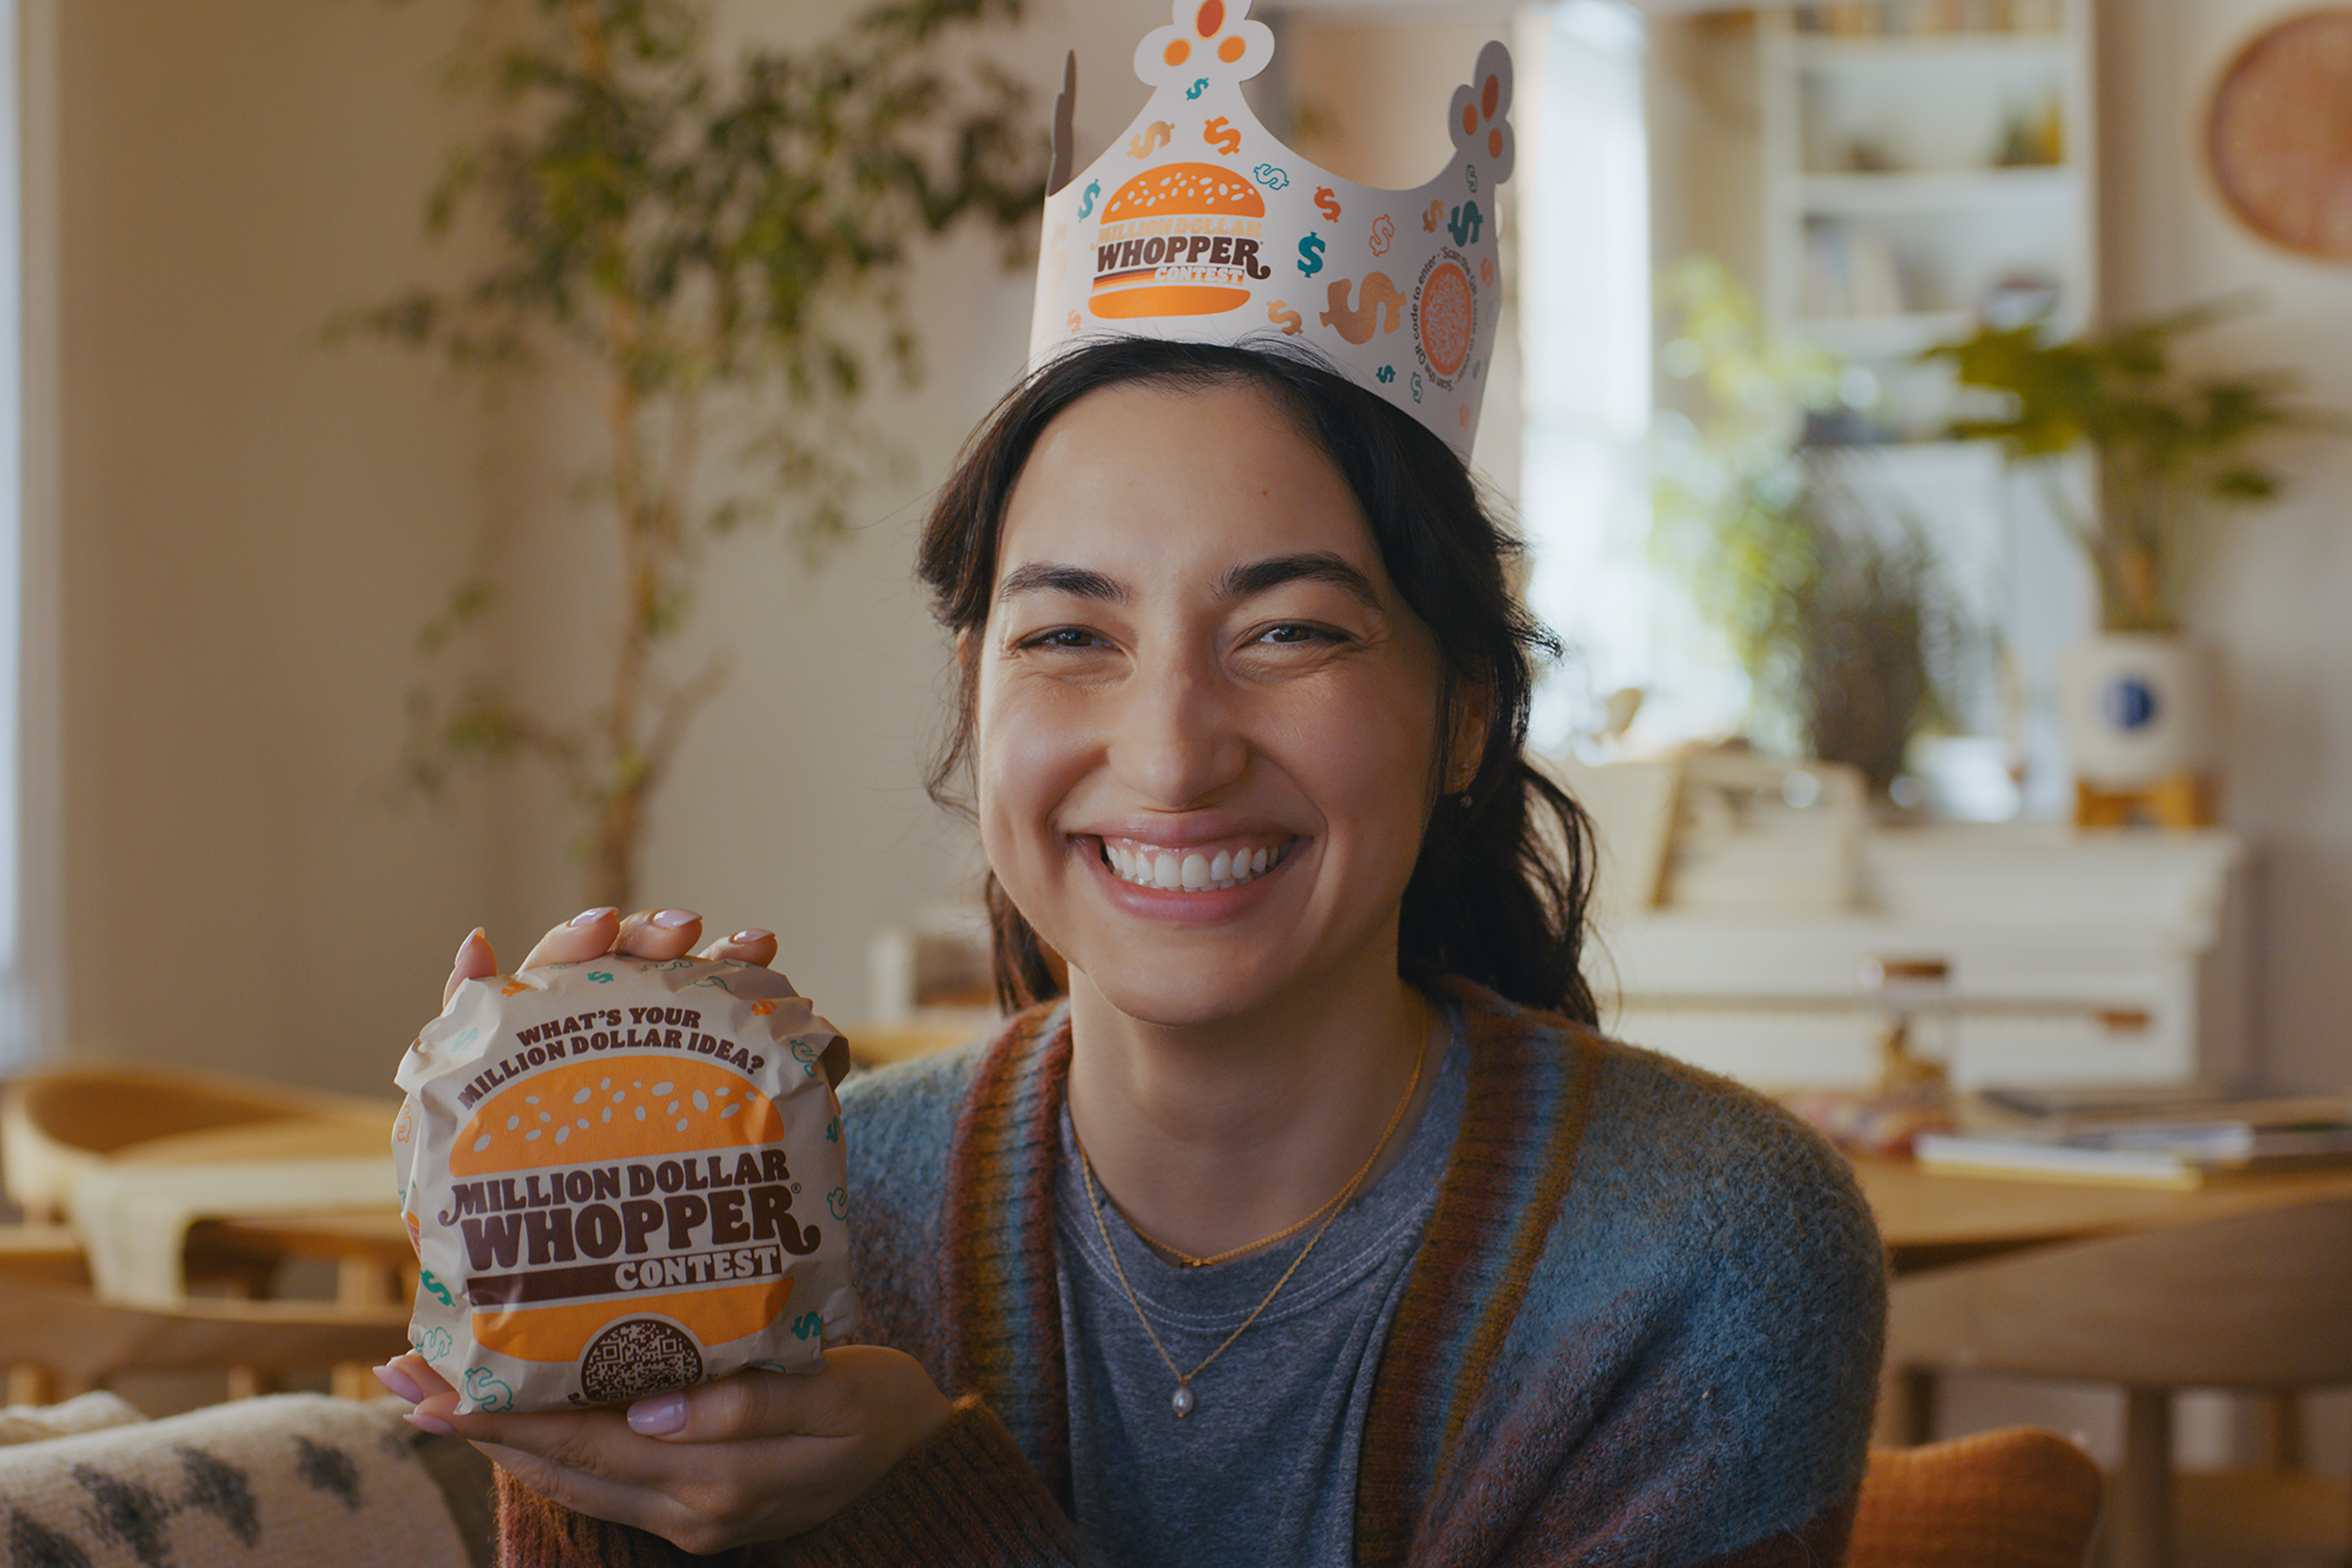 Burger King is launching its first-ever Million Dollar Whopper Contest